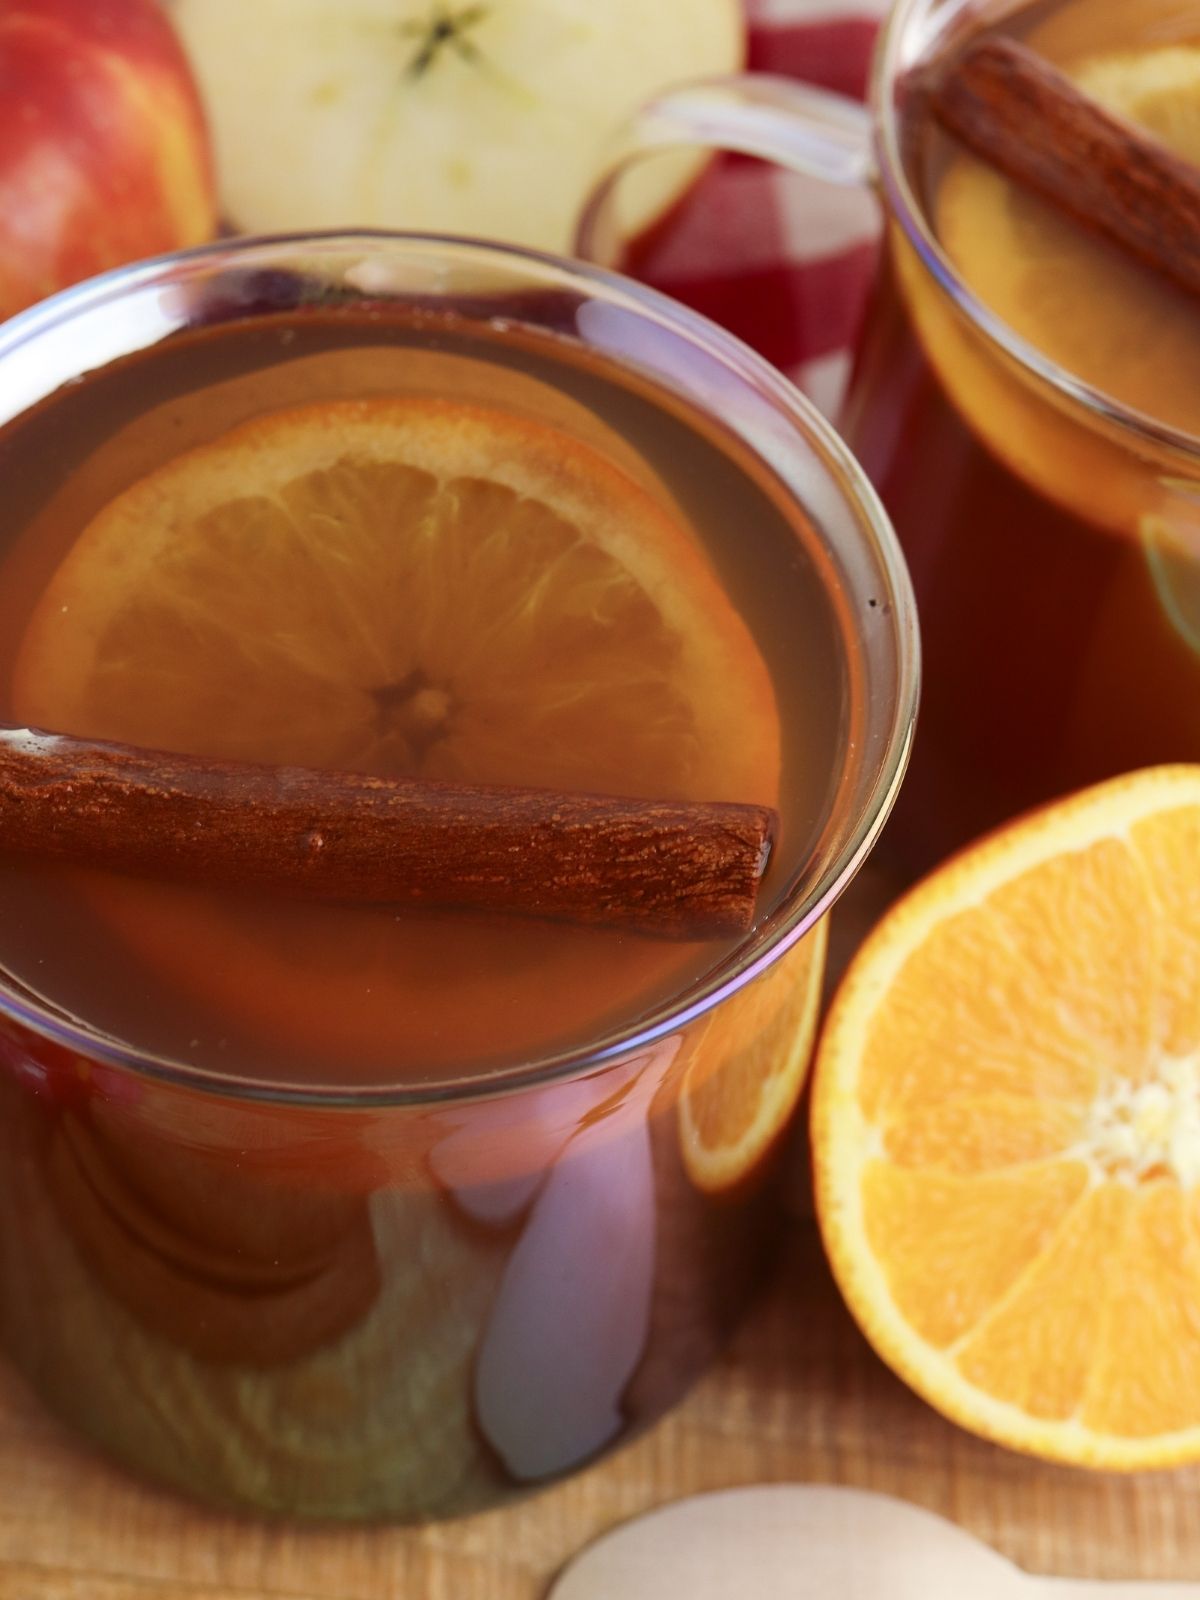 apple cider served in glasses with oranges, apples and cinnamon sticks.